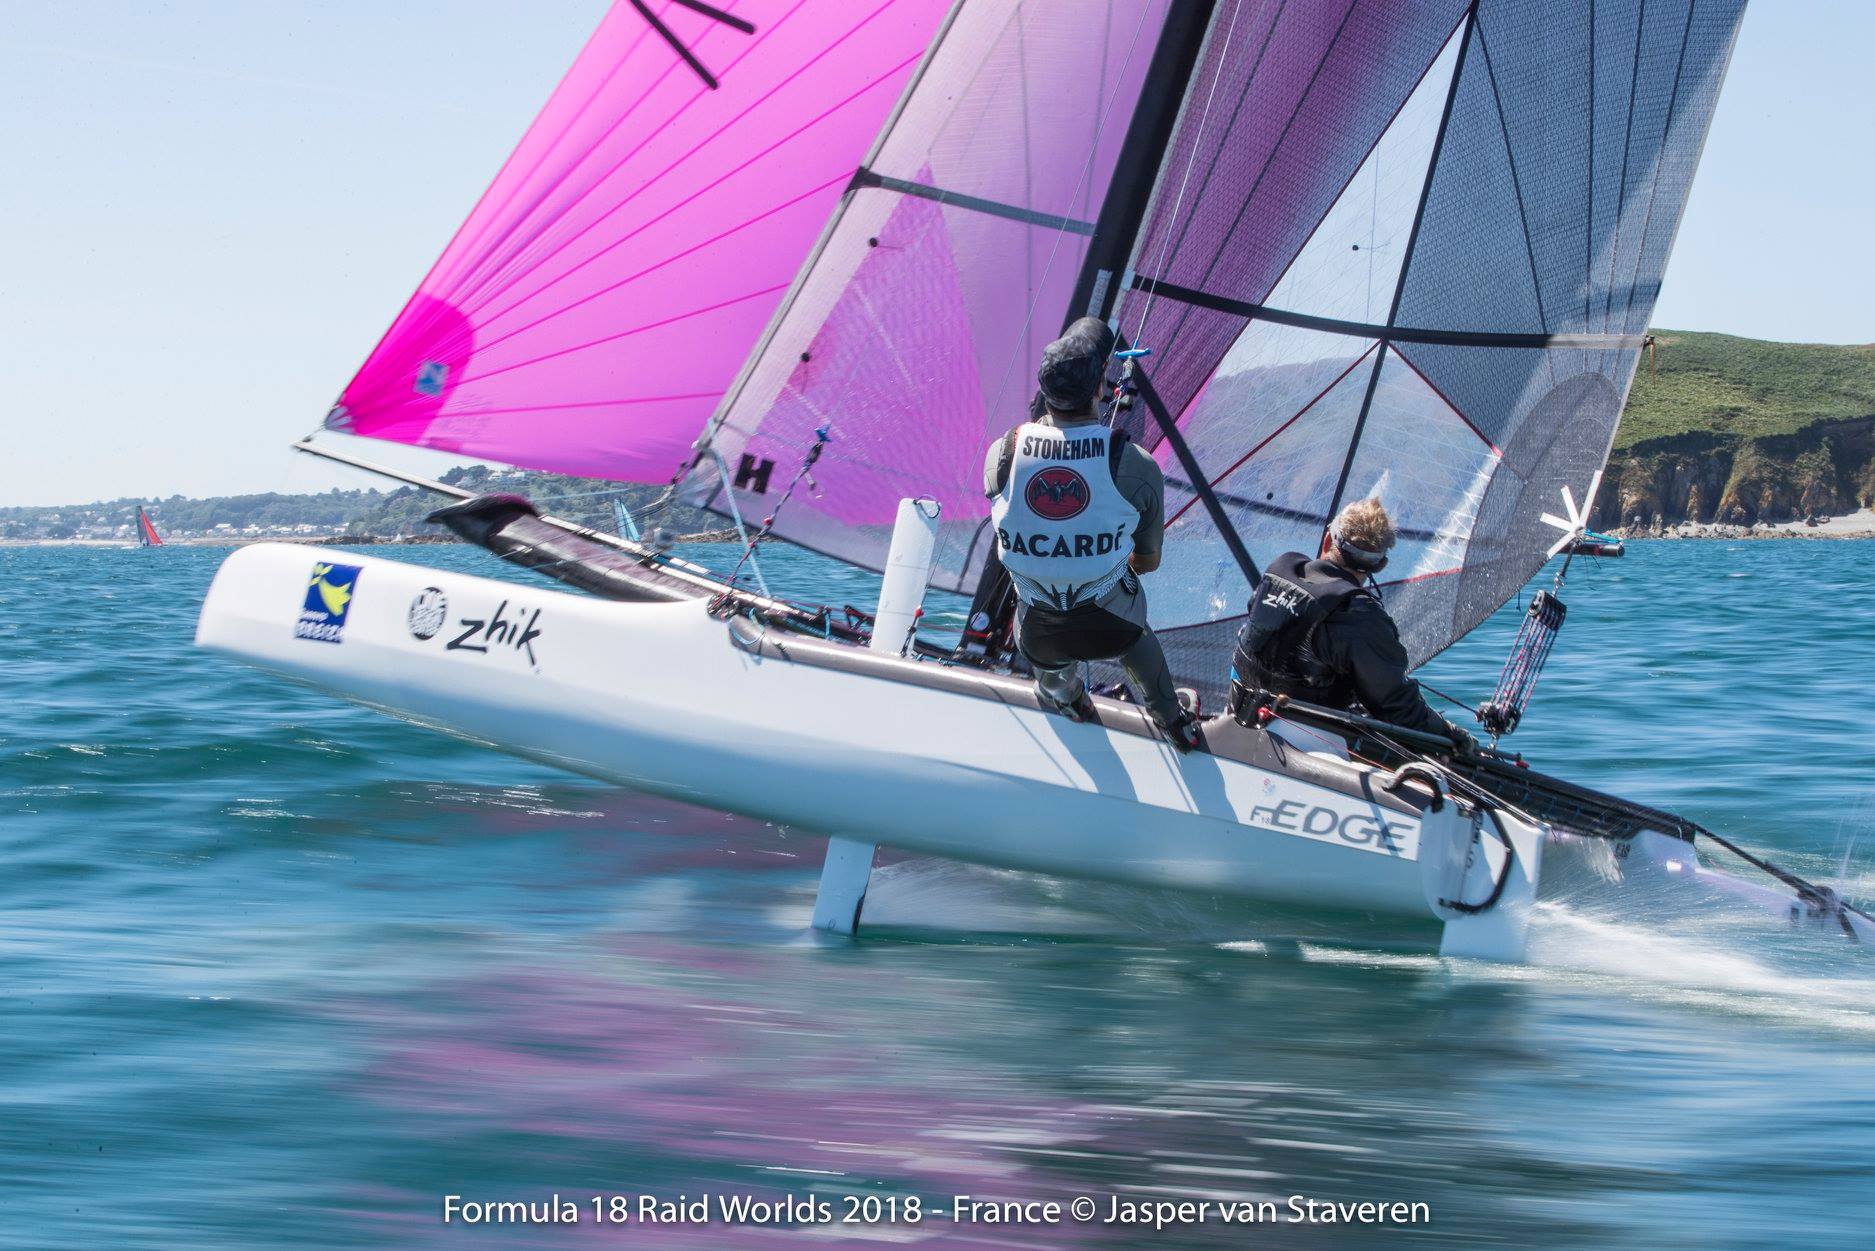 Two Windrush Edge charter boats available for Sarasota Worlds ...